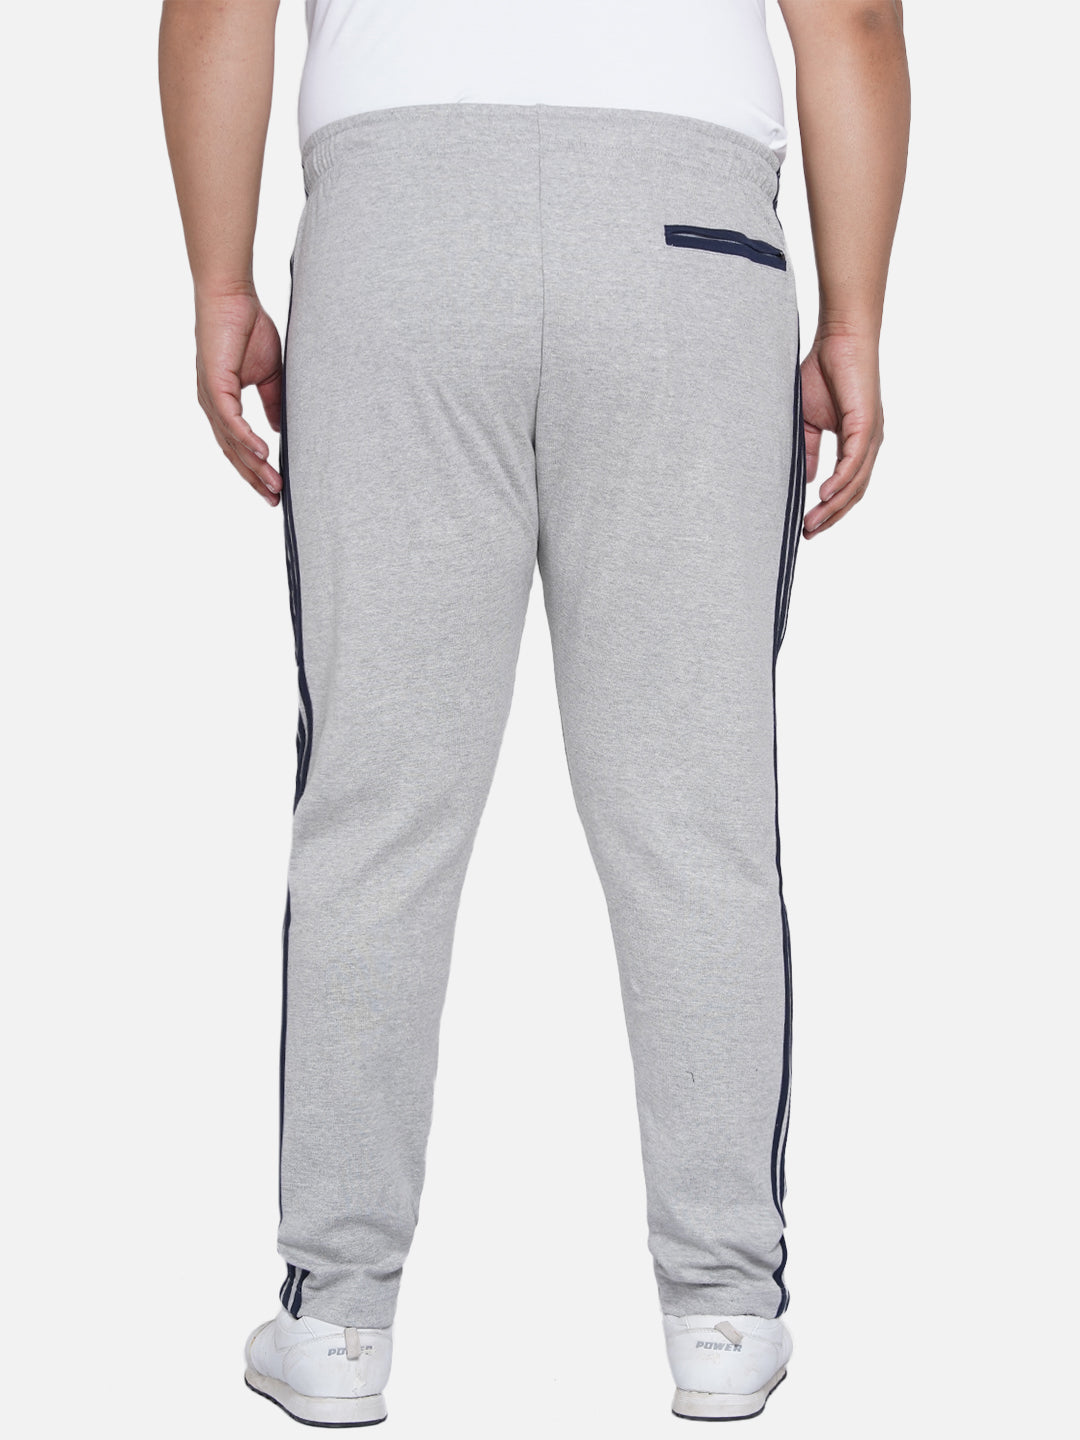 Latest Monte Carlo Joggers & Track Pants arrivals - Men - 5 products |  FASHIOLA INDIA